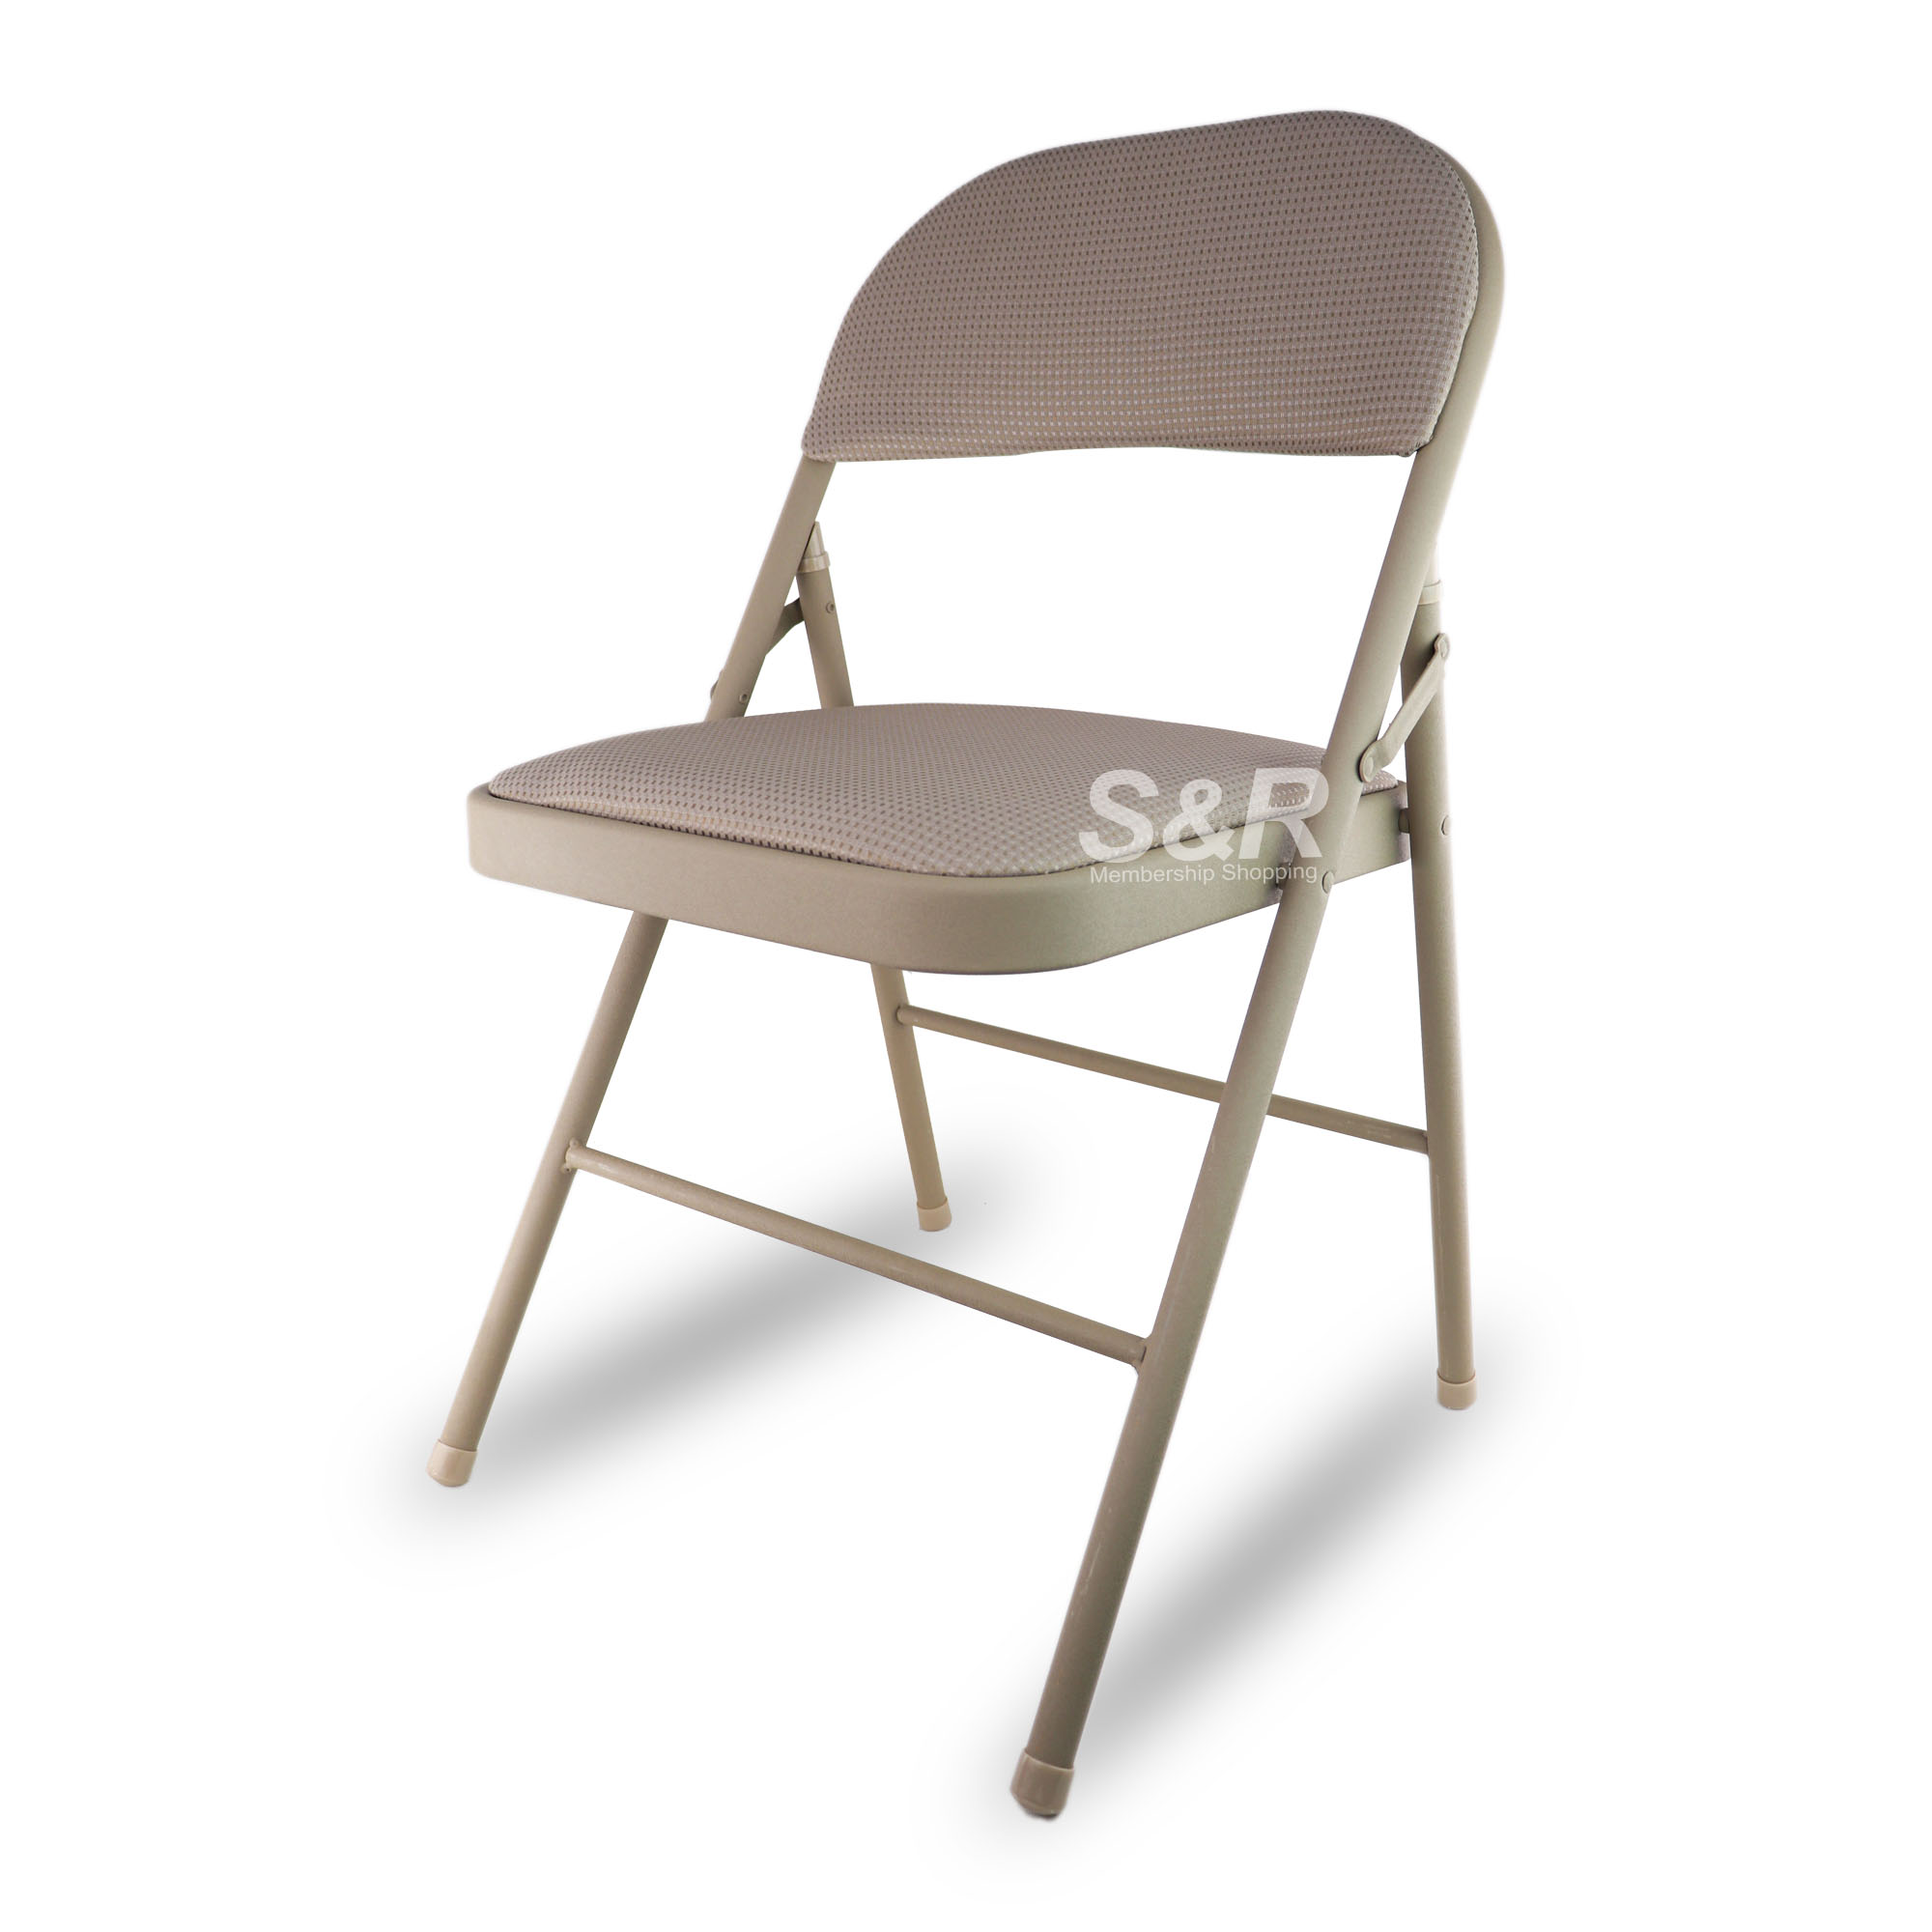 Cosco Deluxe Fabric Folding Chair 1pc